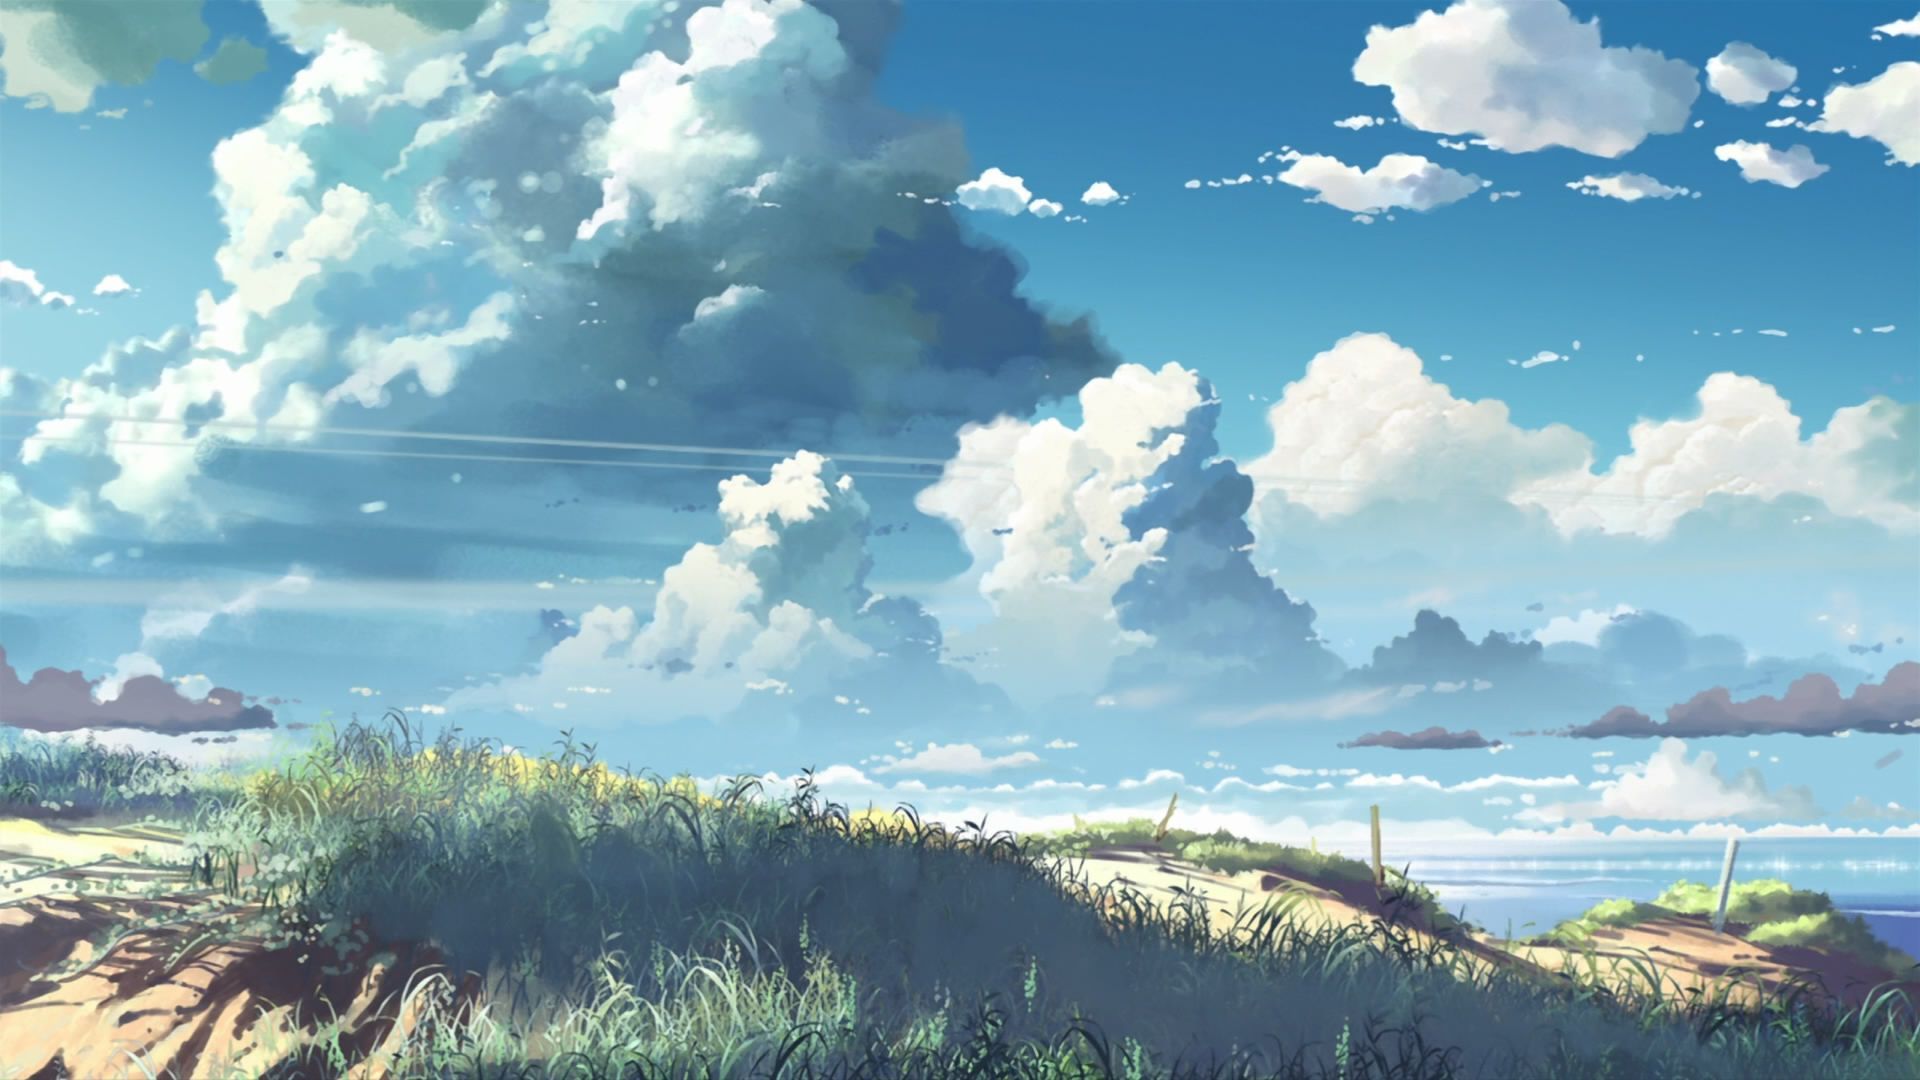 Nature Anime Scenery Background Wallpaper. Anime scenery, Scenery background, Scenery wallpaper